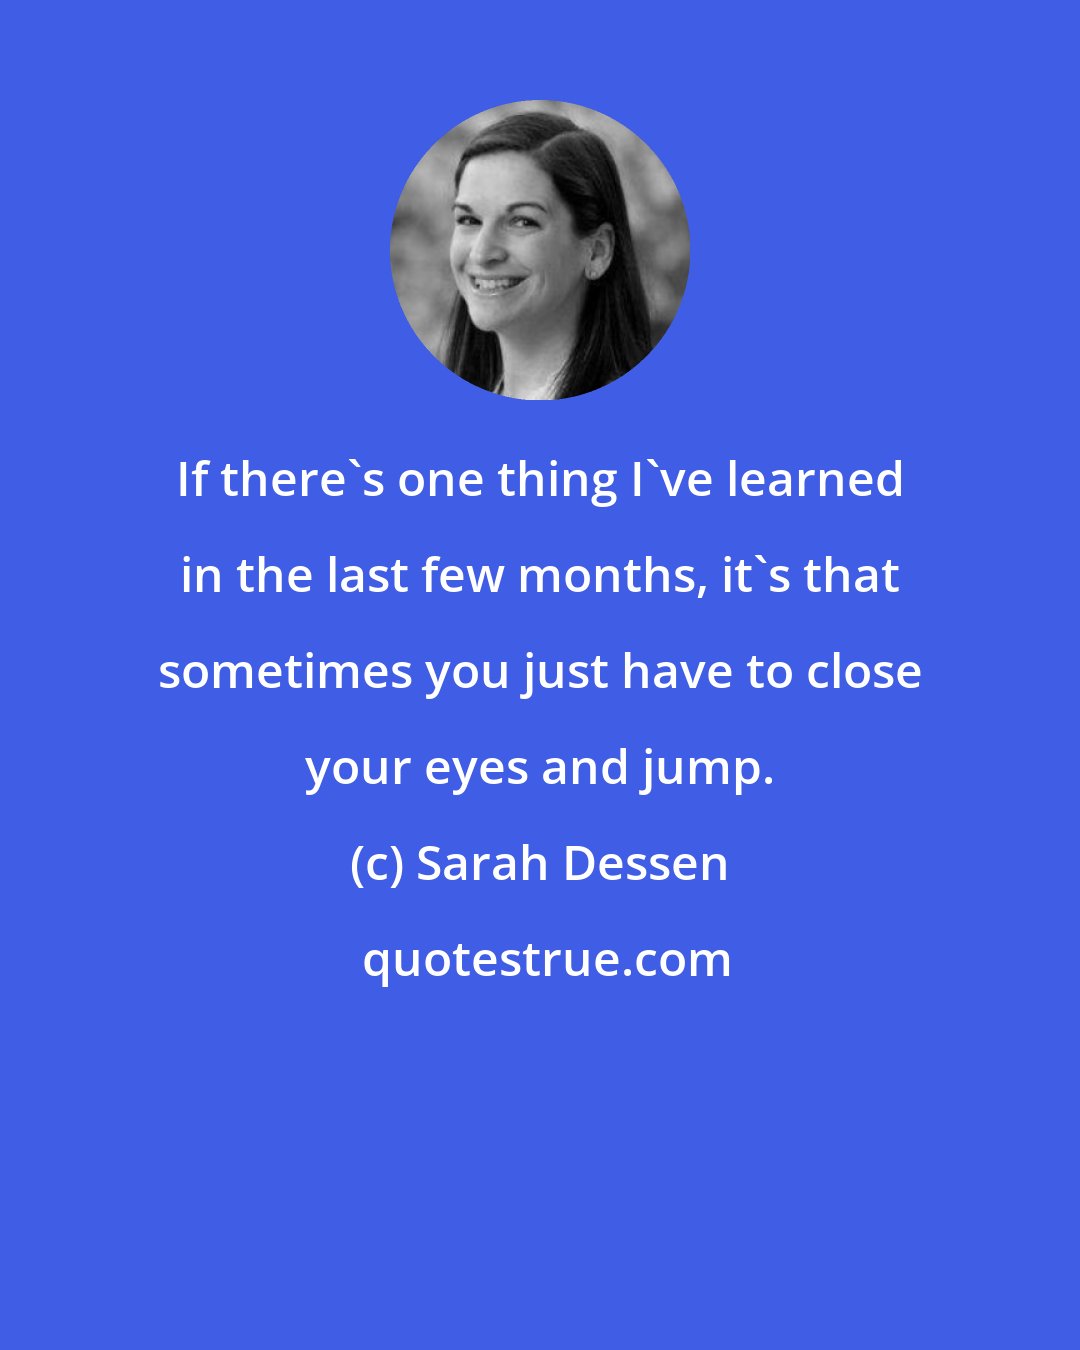 Sarah Dessen: If there's one thing I've learned in the last few months, it's that sometimes you just have to close your eyes and jump.